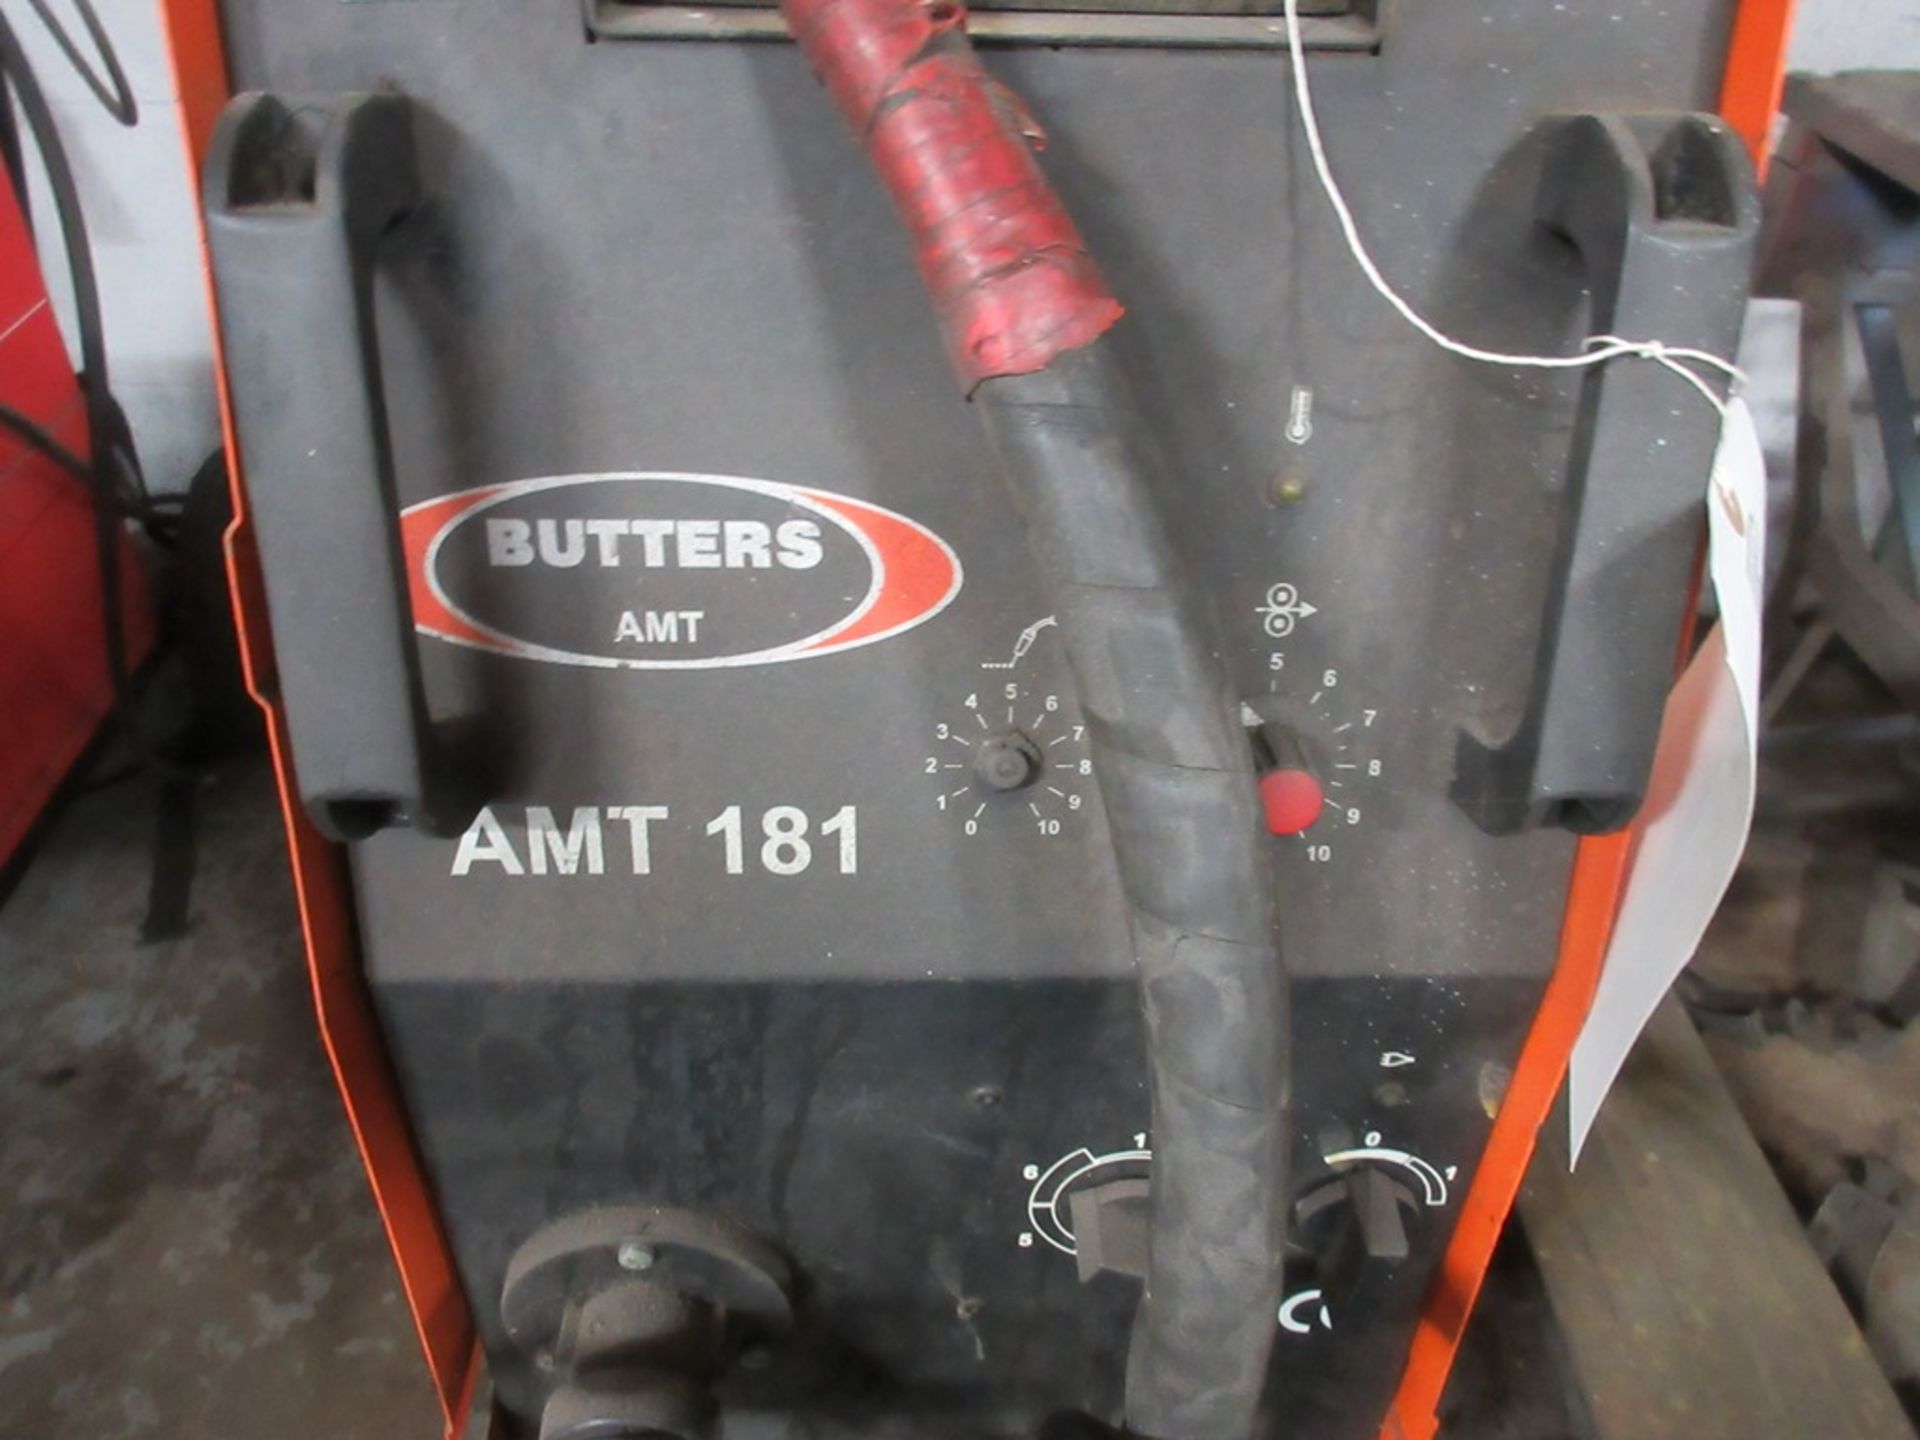 Butters AMT 181 mig welder, serial no. 6070031 - Image 4 of 6